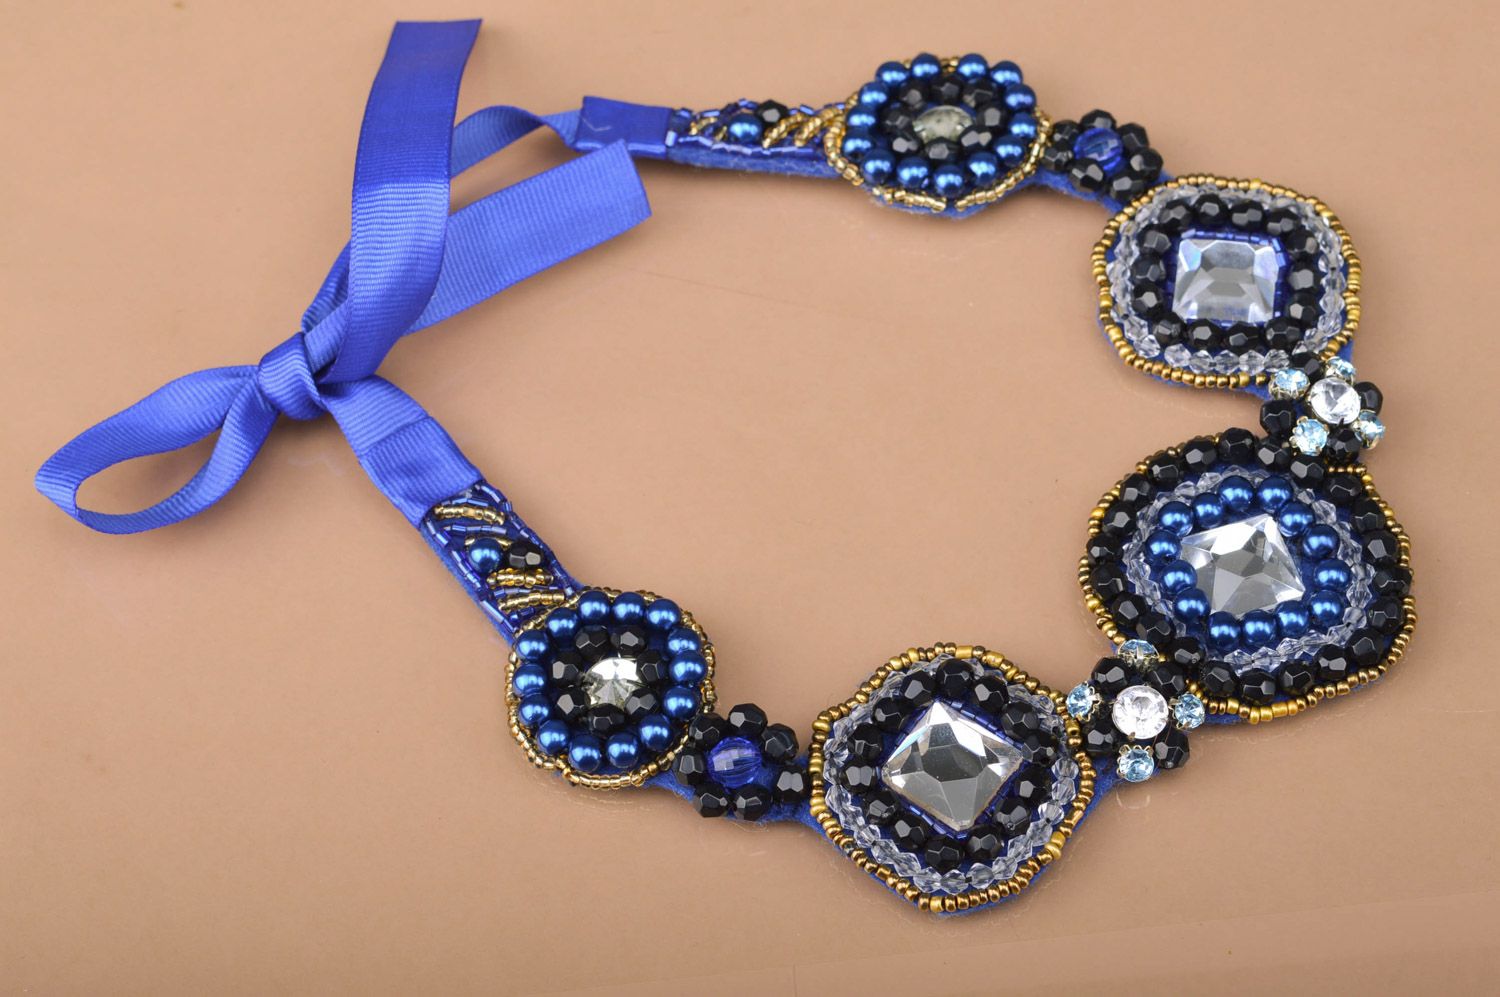 Elegant handmade bead embroidered collar necklace in blue colors 1001 nights photo 2